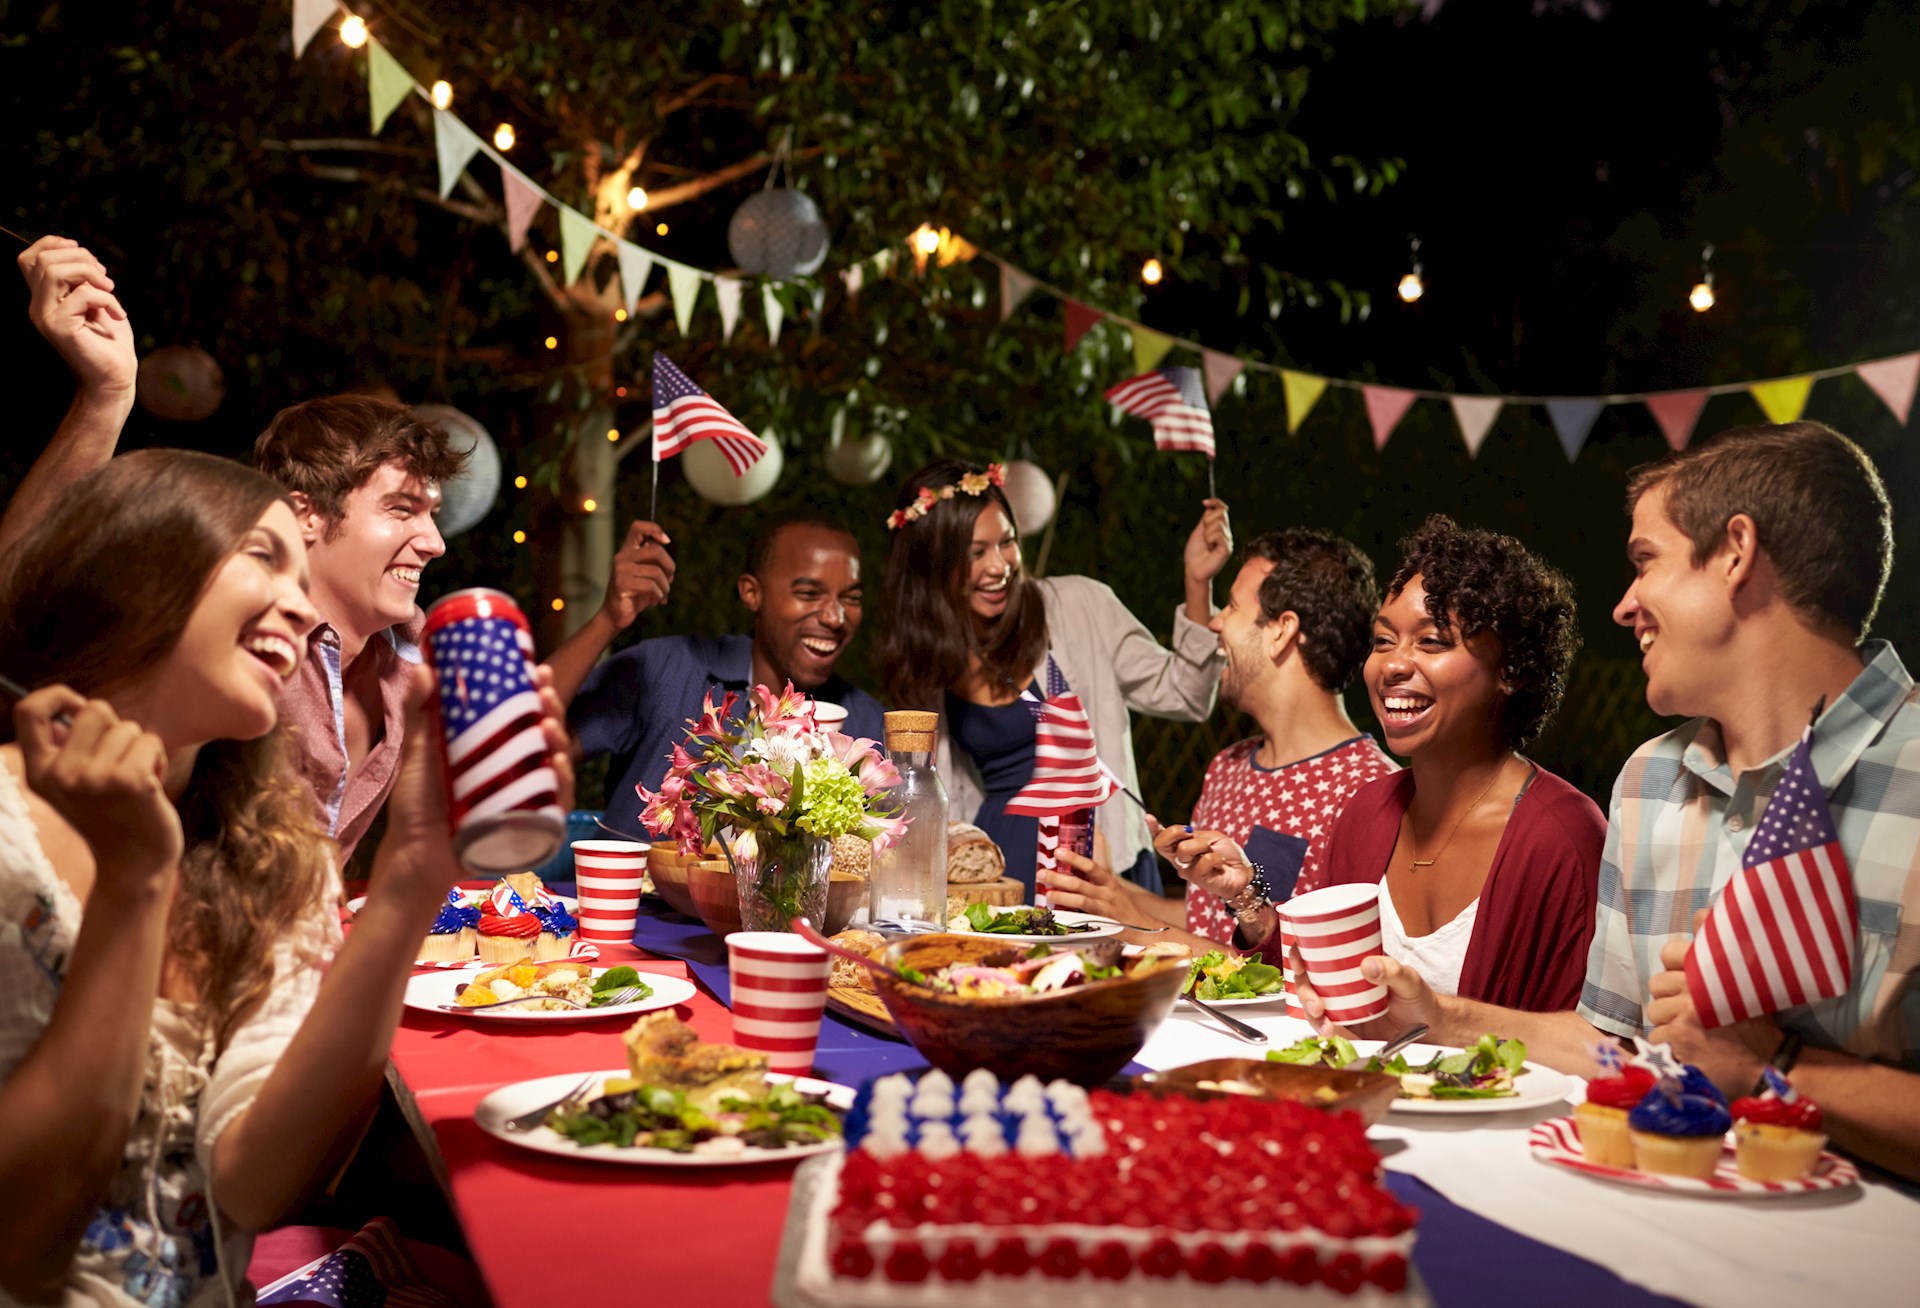 Cook and chill food properly on the Fourth of July for a safe and fun holiday.